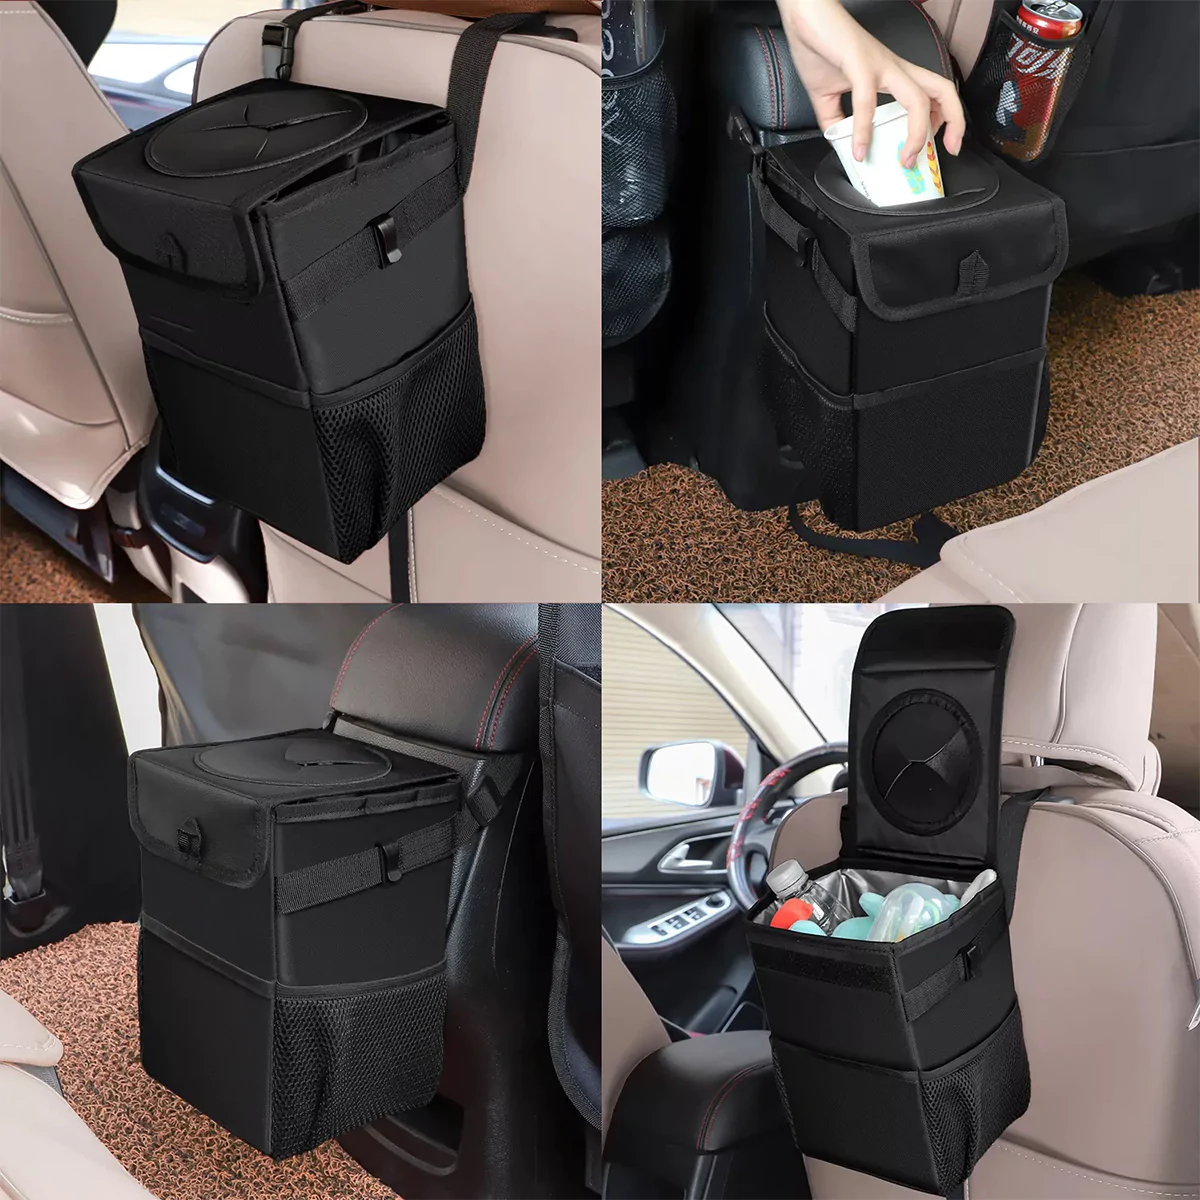 Waterproof Car Trash Can with Lid and Storage Pockets, Custom-Fit For Car, 100% Leak-Proof Car Organizer, Waterproof Car Garbage Can, Multipurpose Trash Bin for Car DLHY234